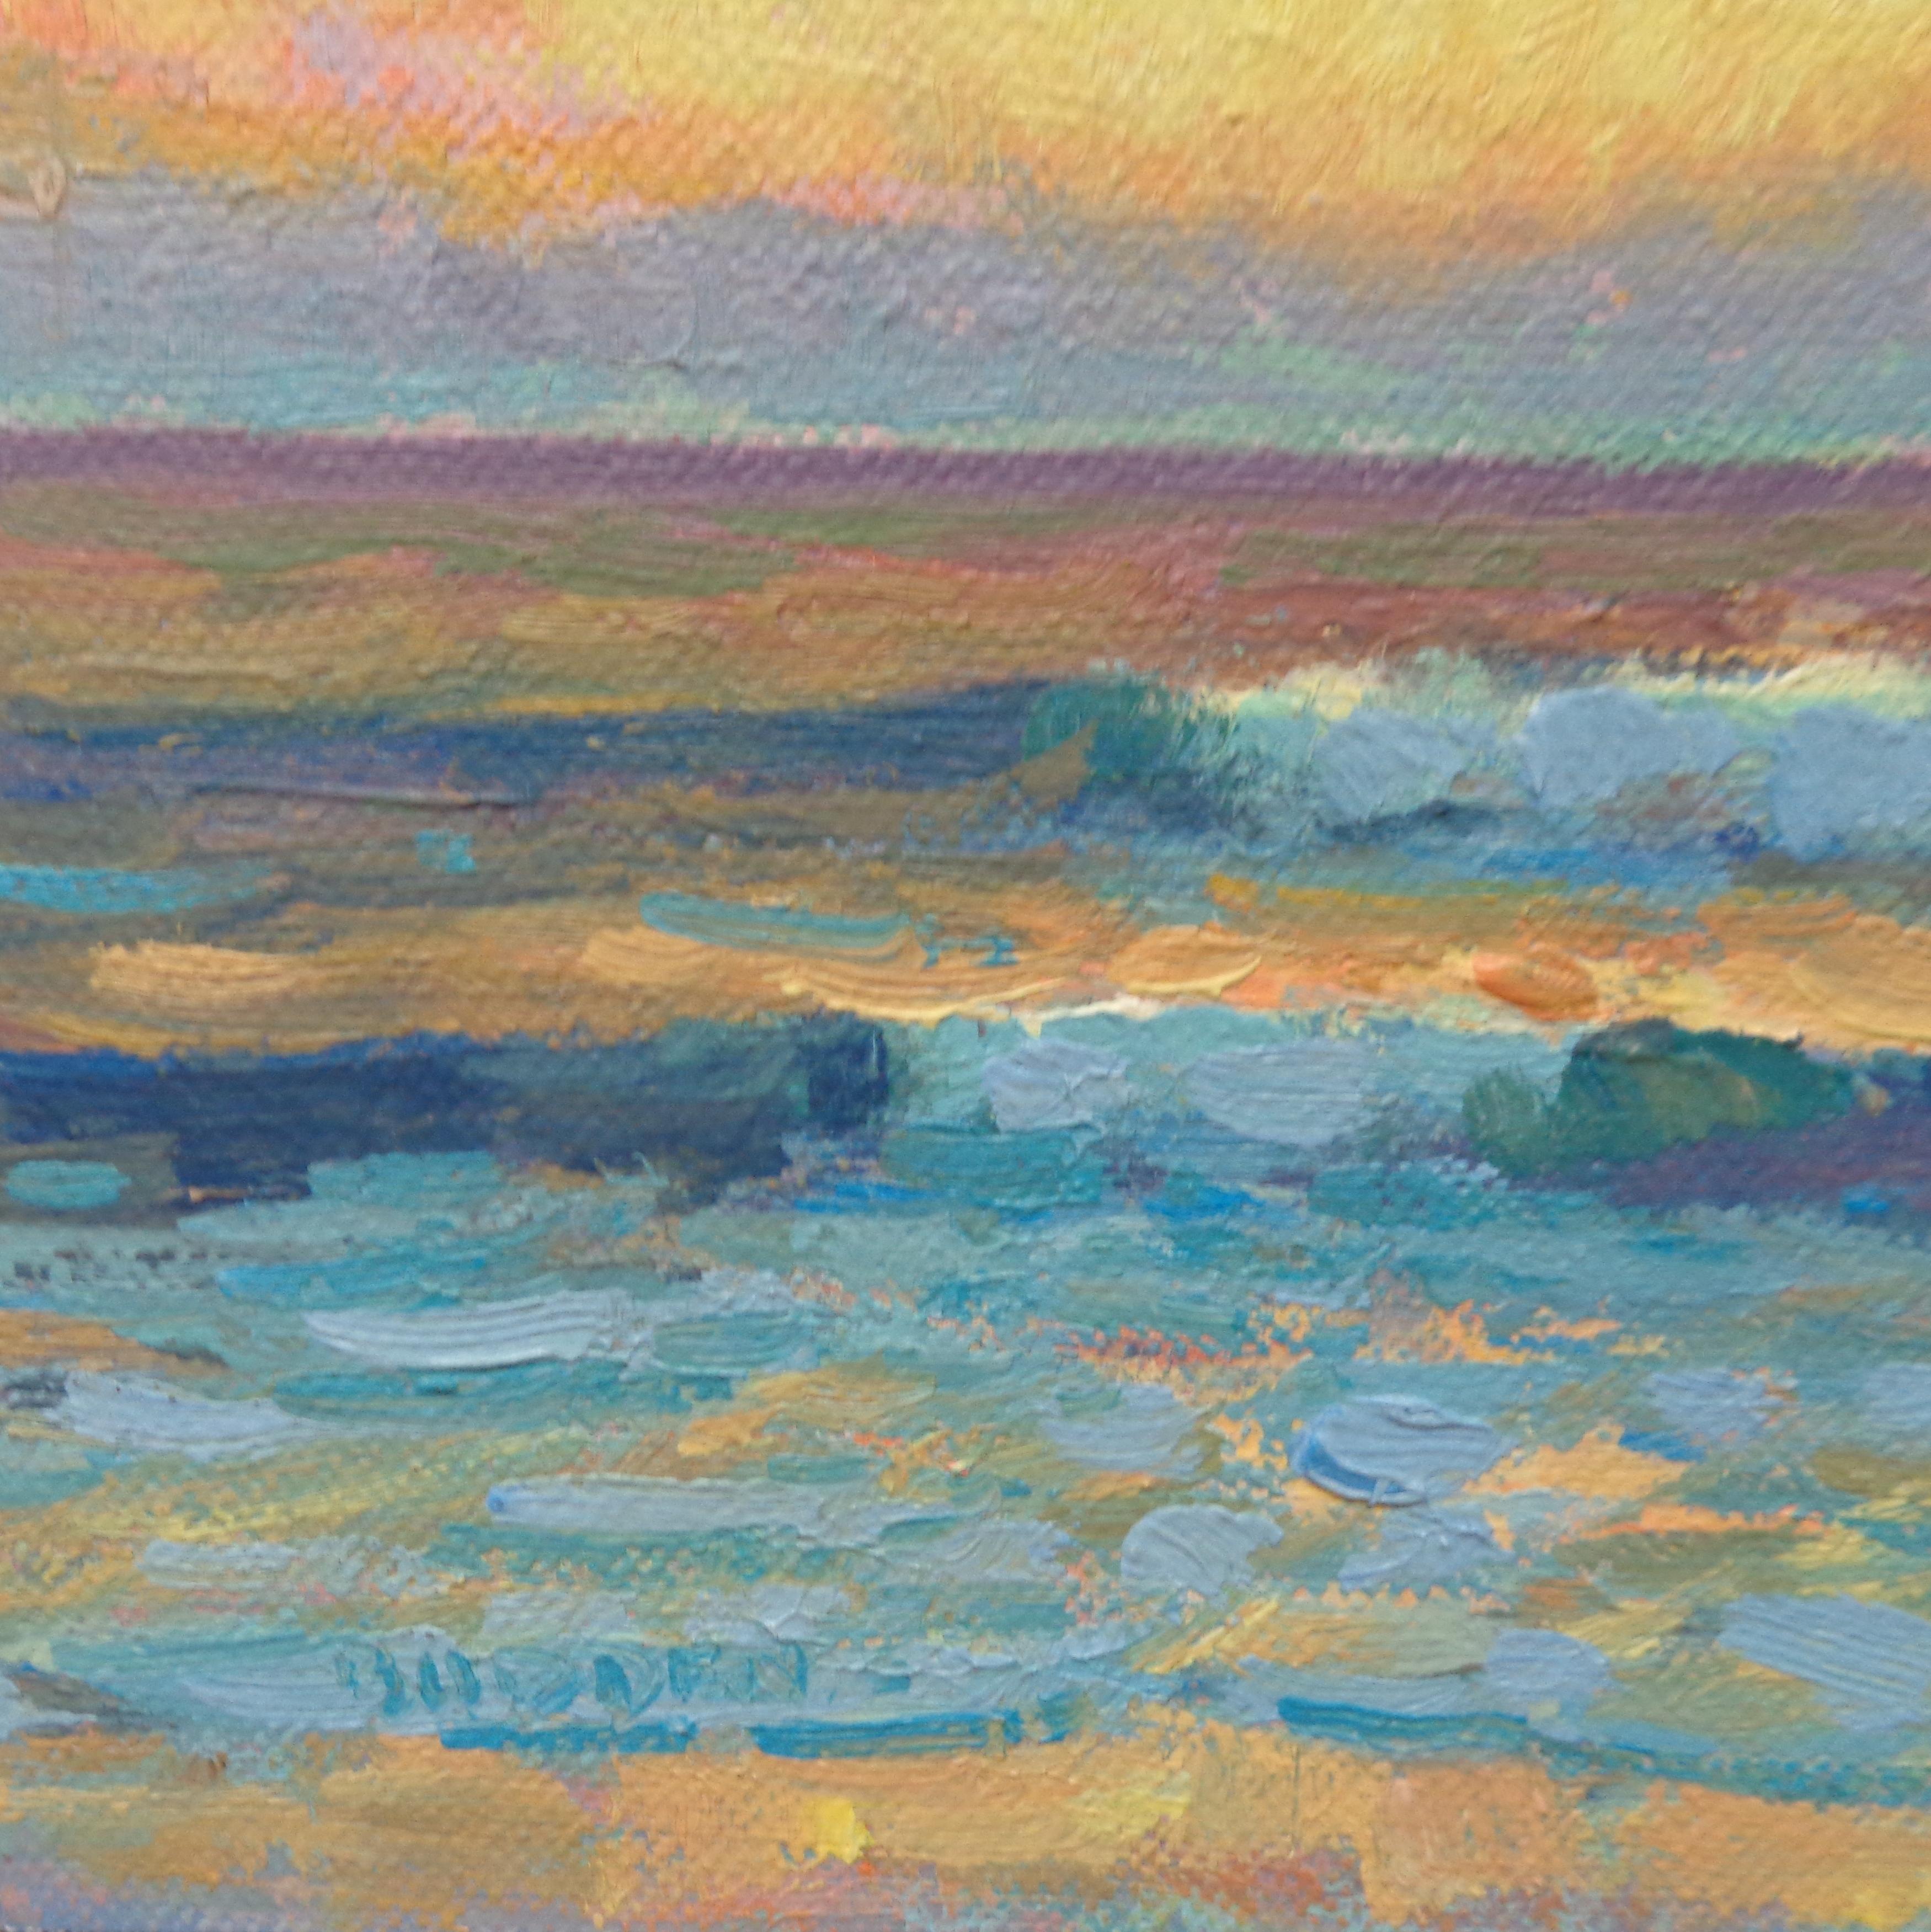 Ocean Beach Seascape Study Oil Painting  by Michael Budden Sunrise Series For Sale 2